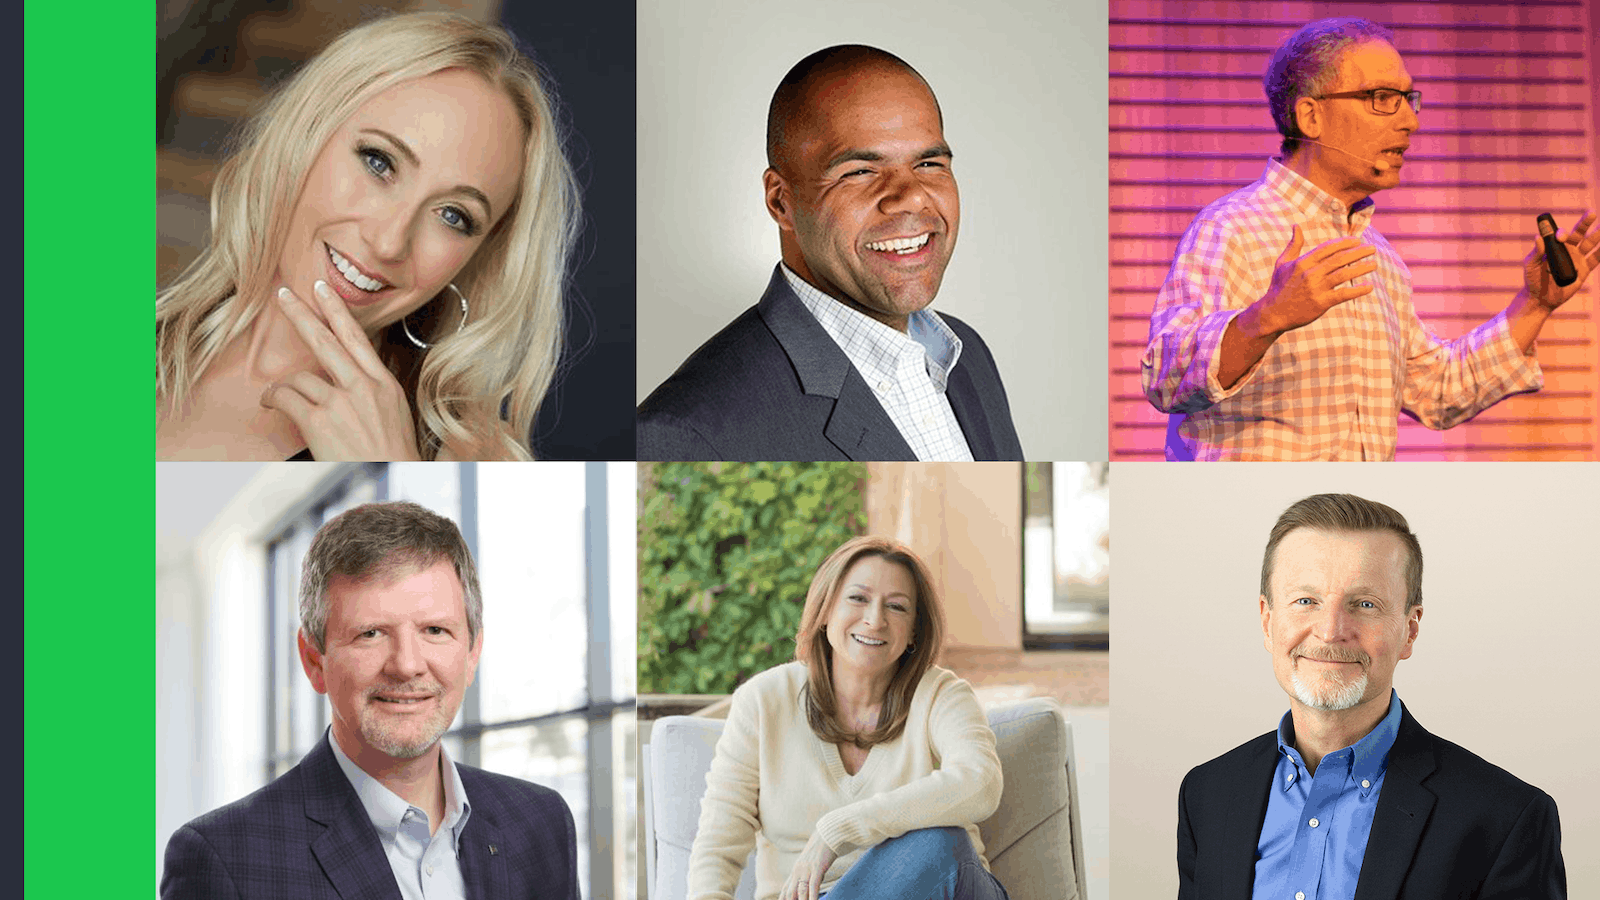 15 Top CX Influencers to Follow